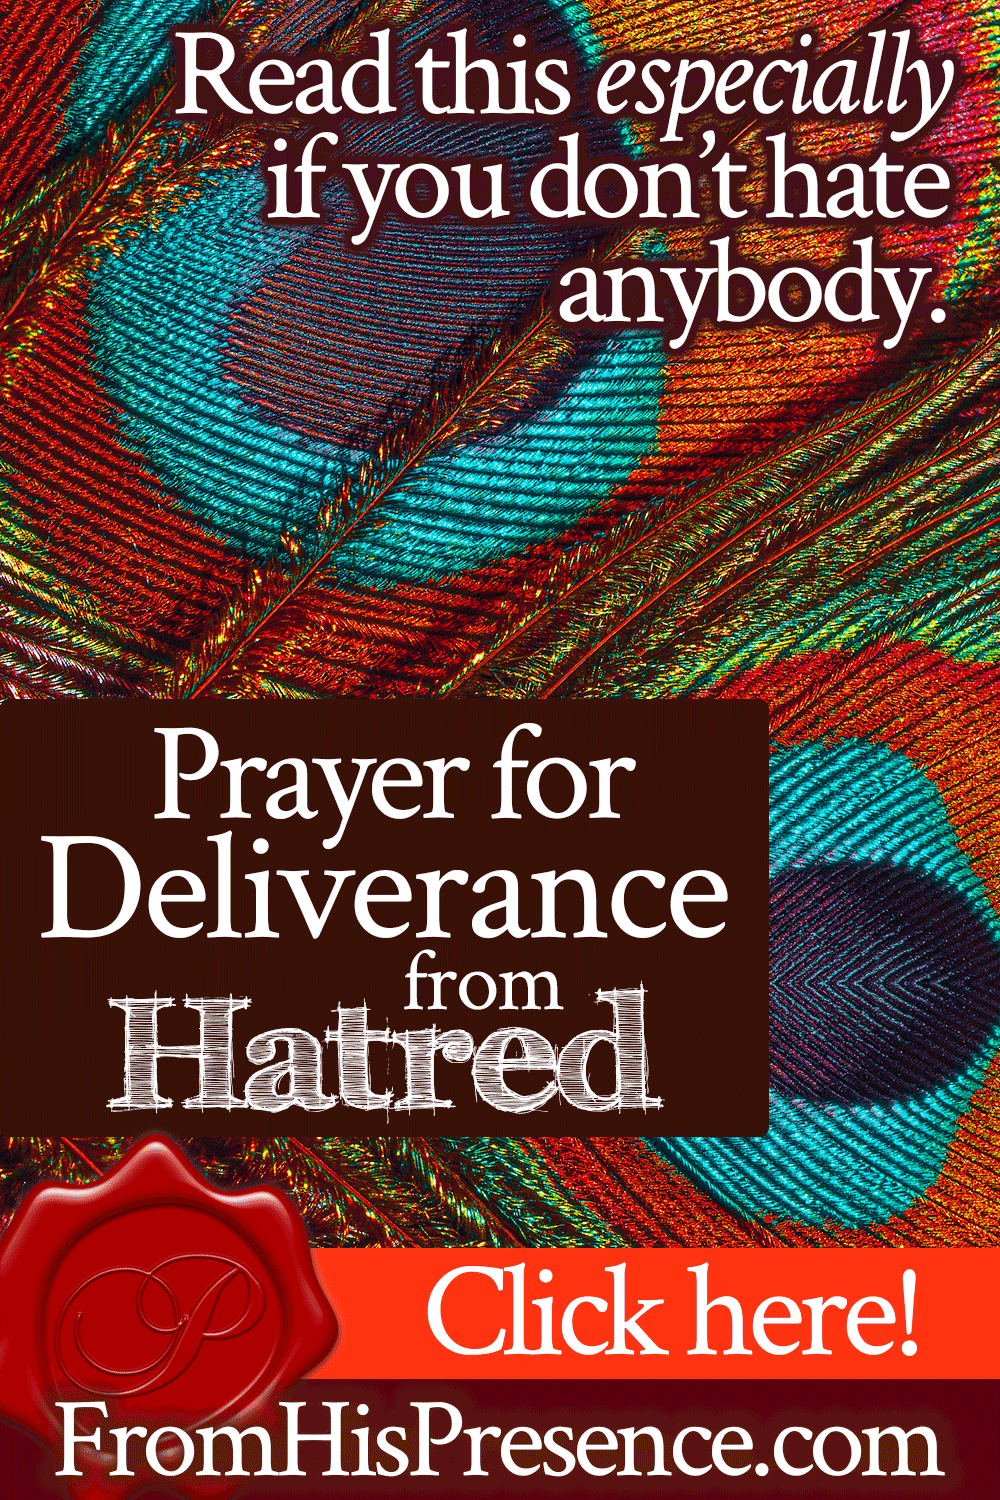 Prayer for Deliverance from Hatred | Read this especially if you don't hate anybody. | Prayer by Jamie Rohrbaugh | FromHisPresence.com